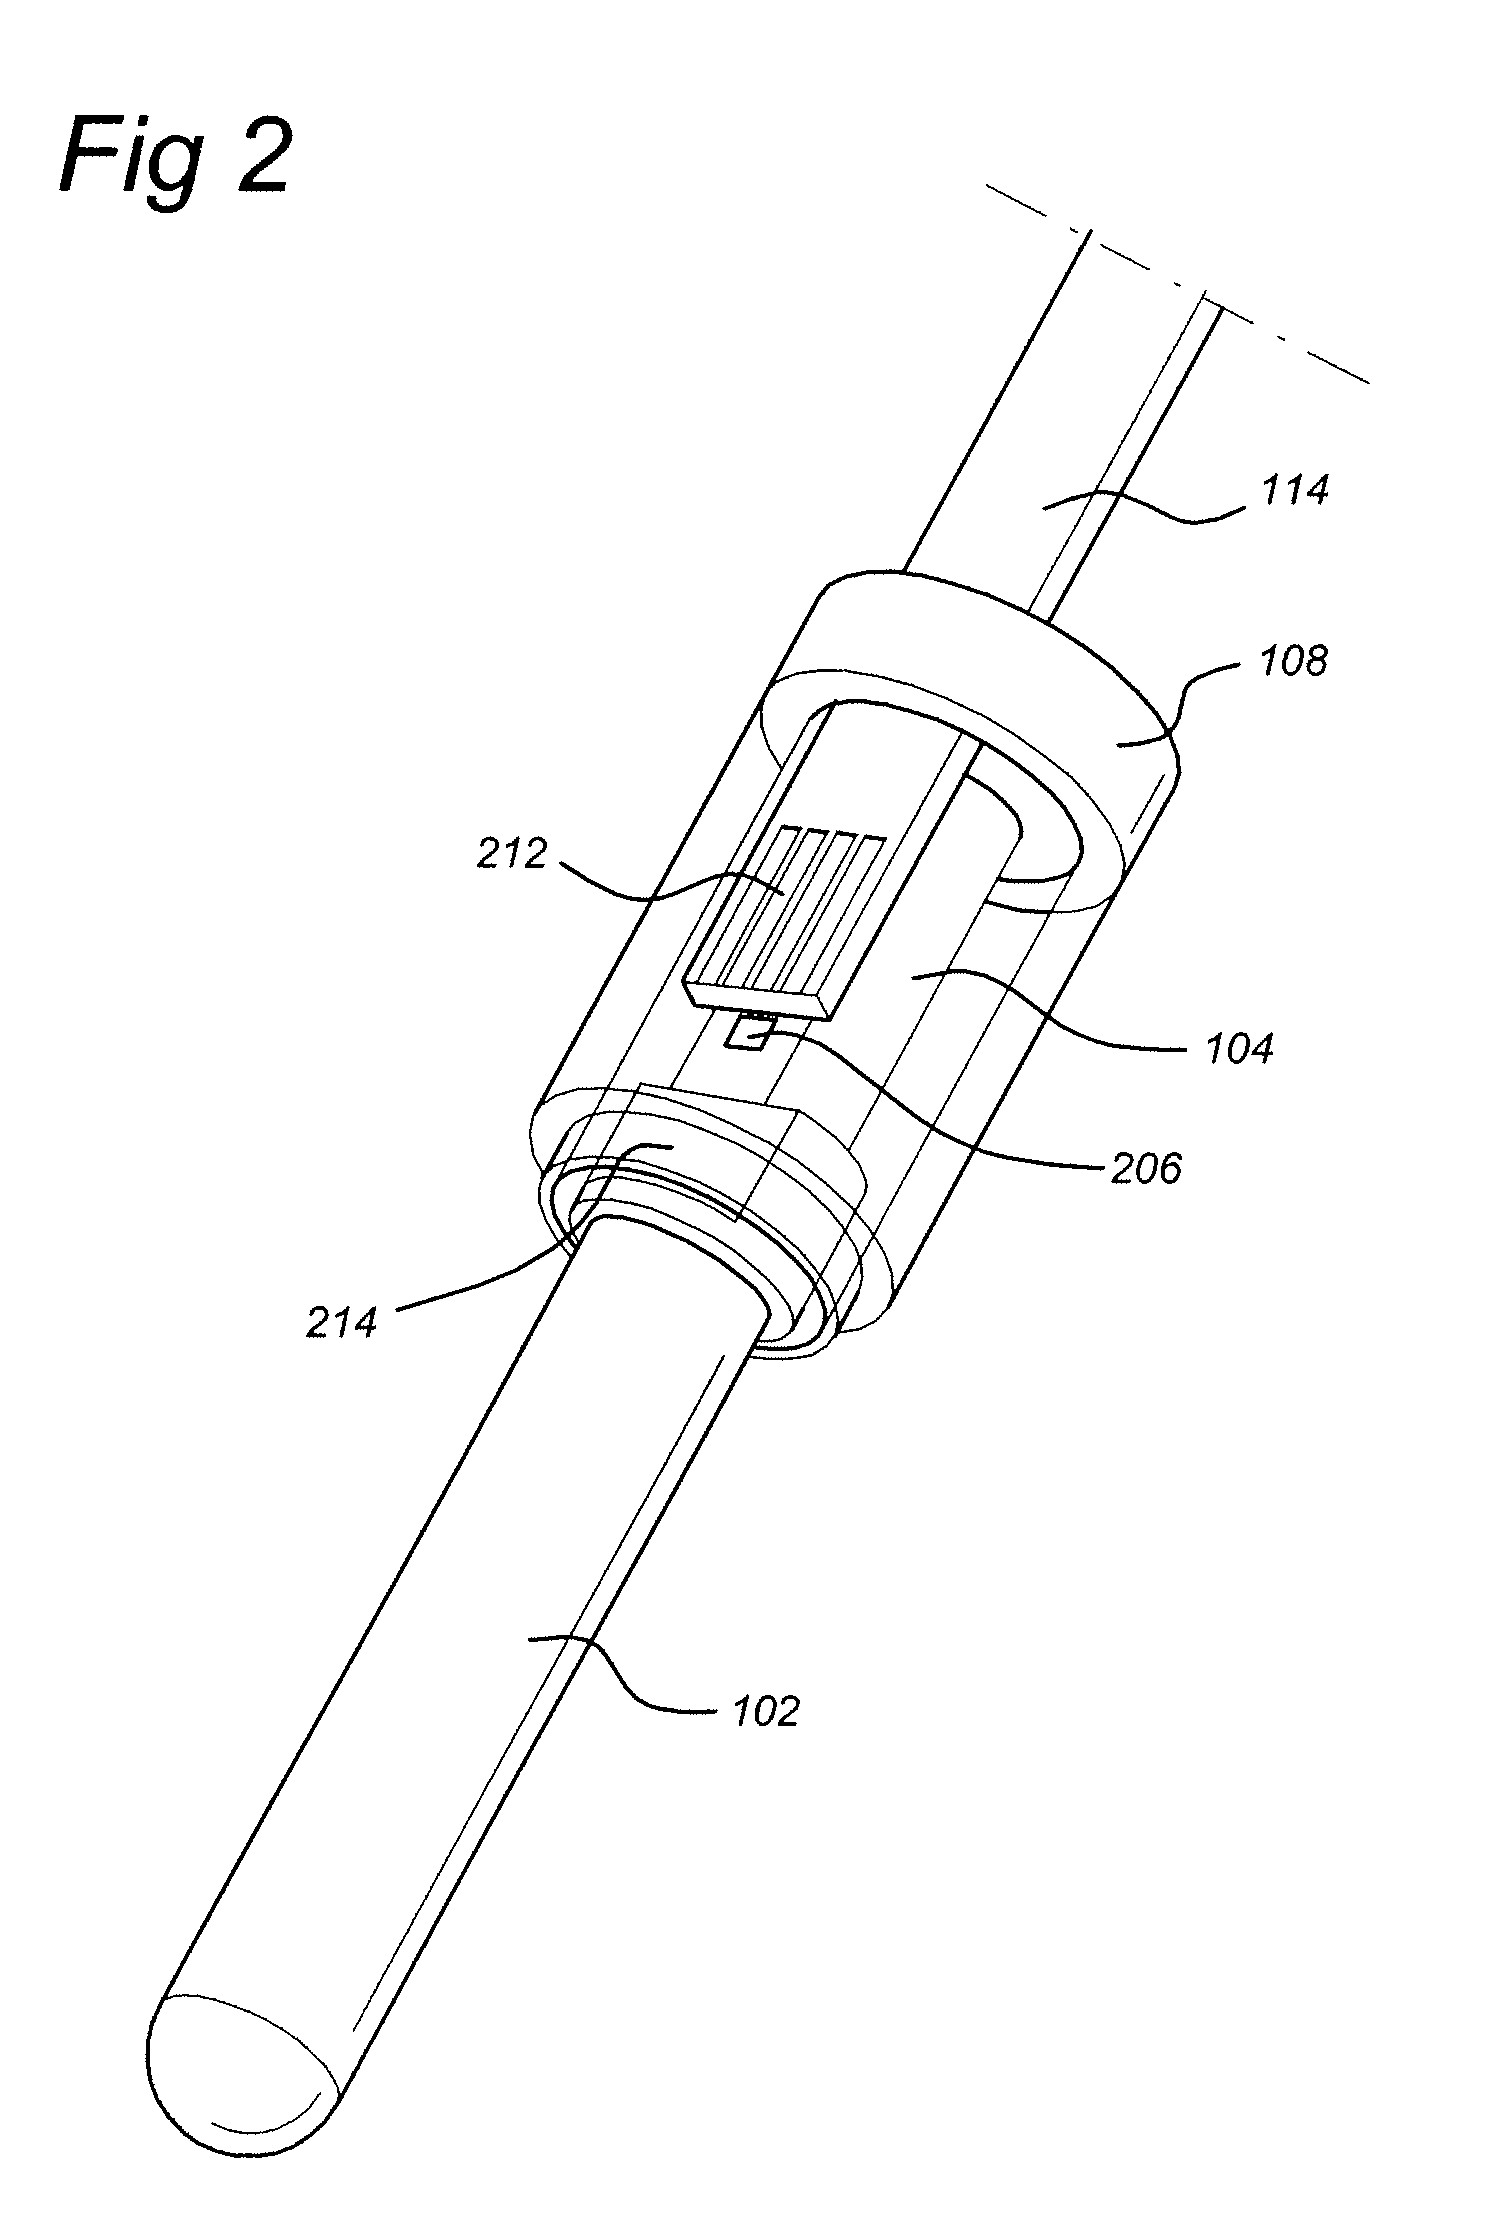 Piezoresistive Pressure-Measuring Plug for a Combustion Engine